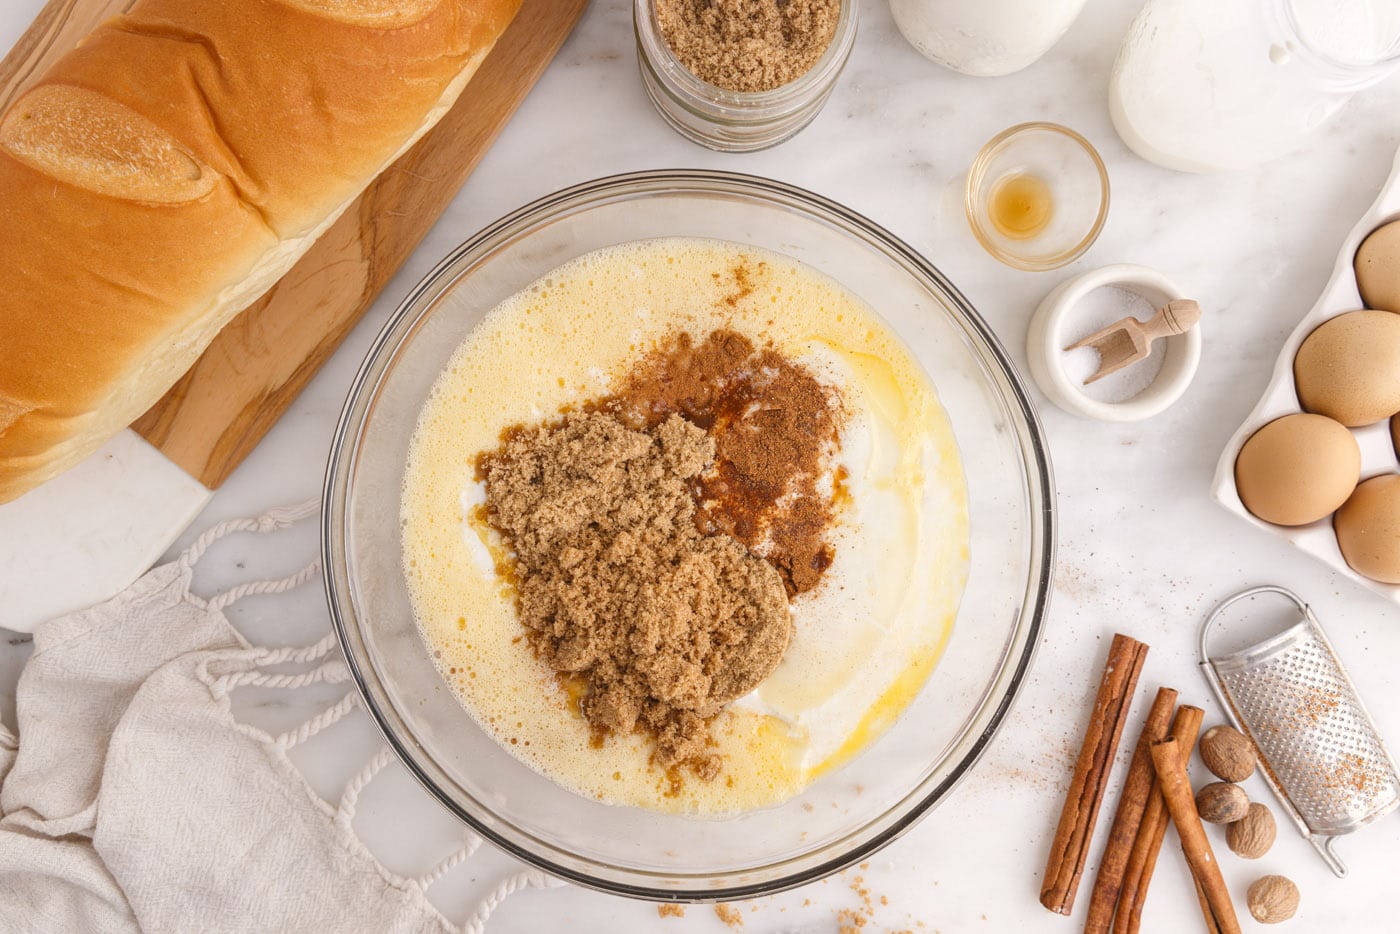 eggs, brown sugar, spices, and buttermilk in a mixing bowl